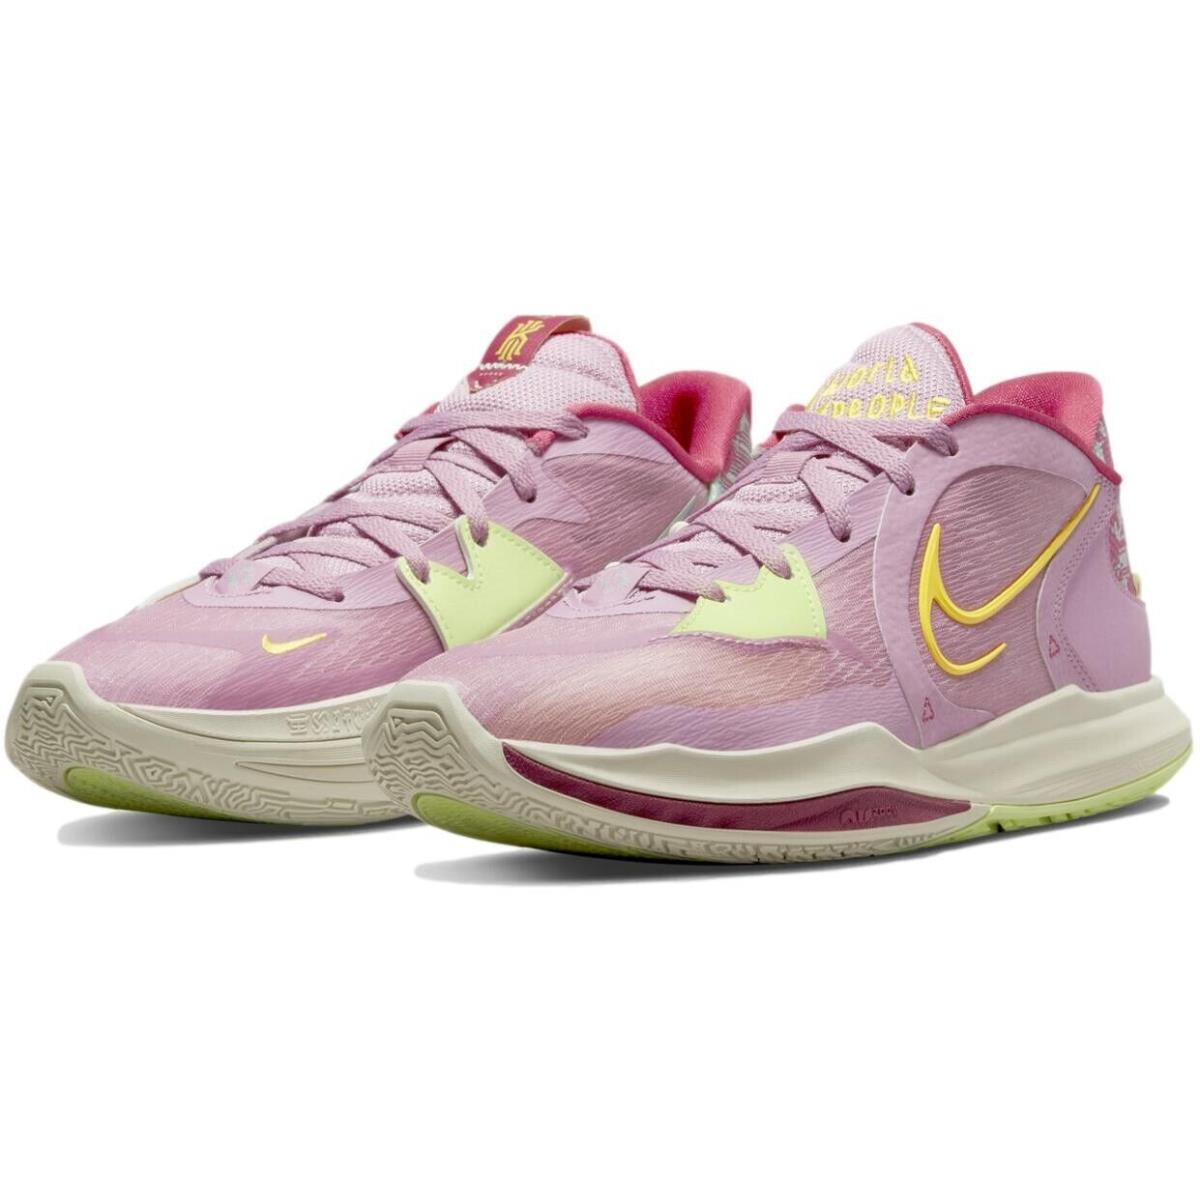 Nike shoes Kyrie - Pink 2